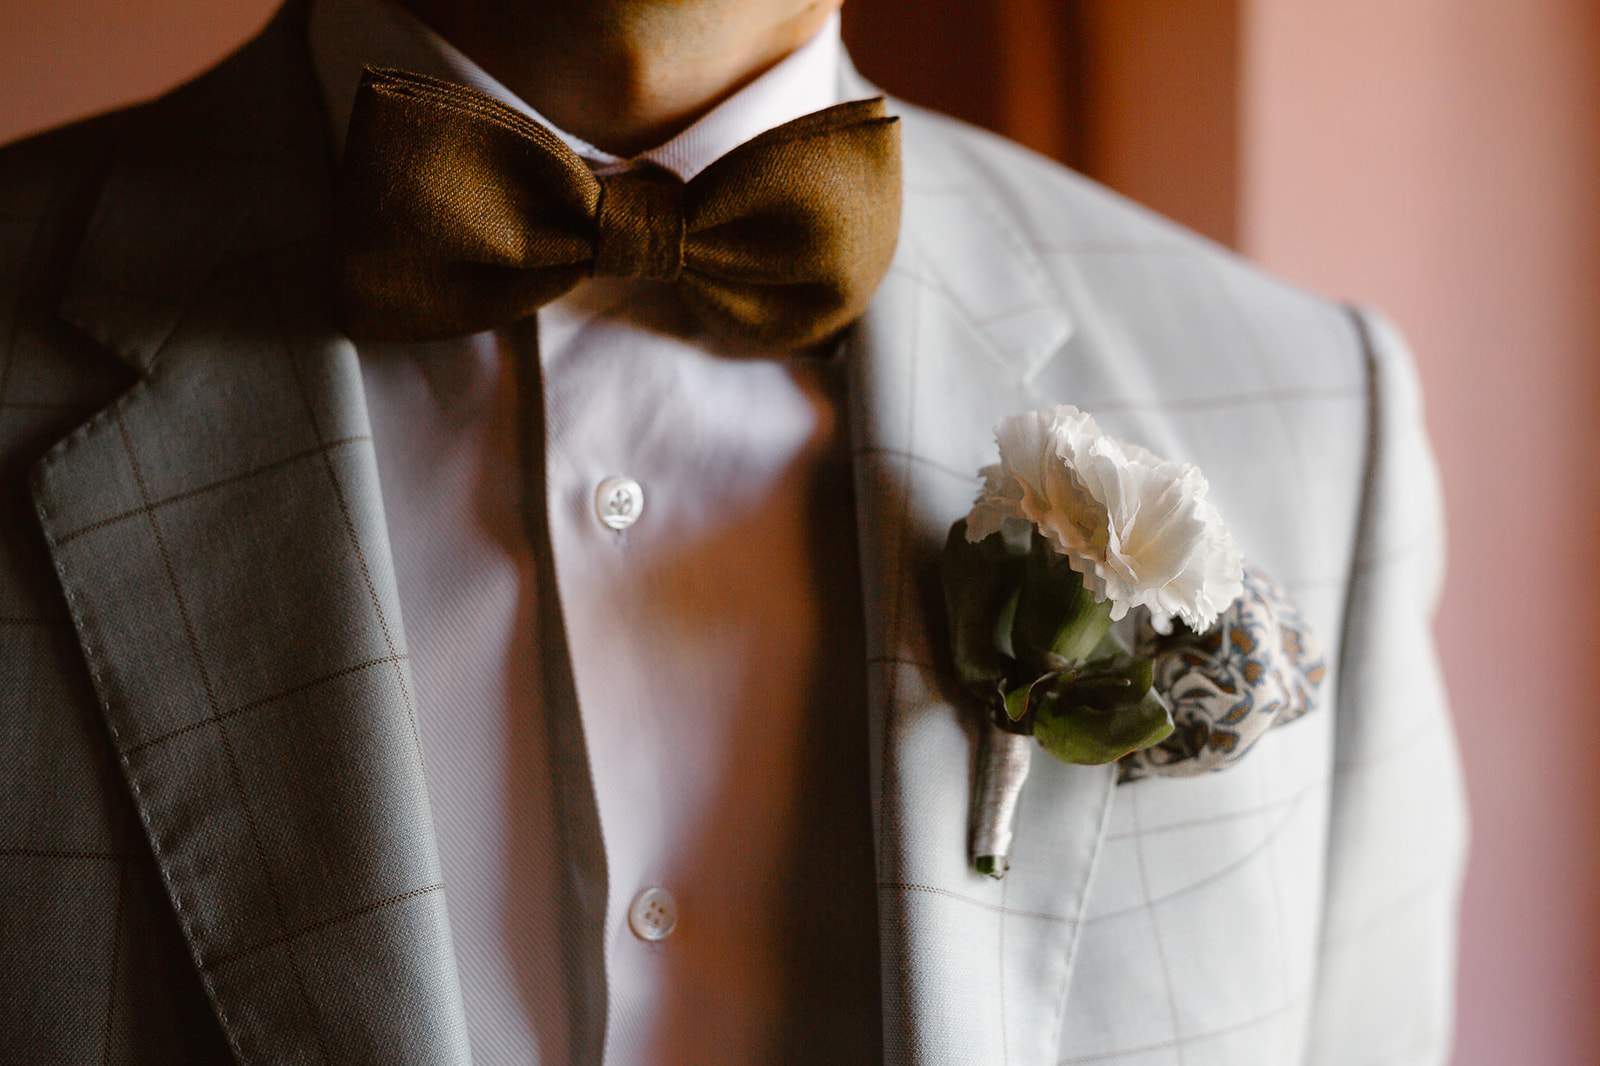 Boutonniere made with a white rose